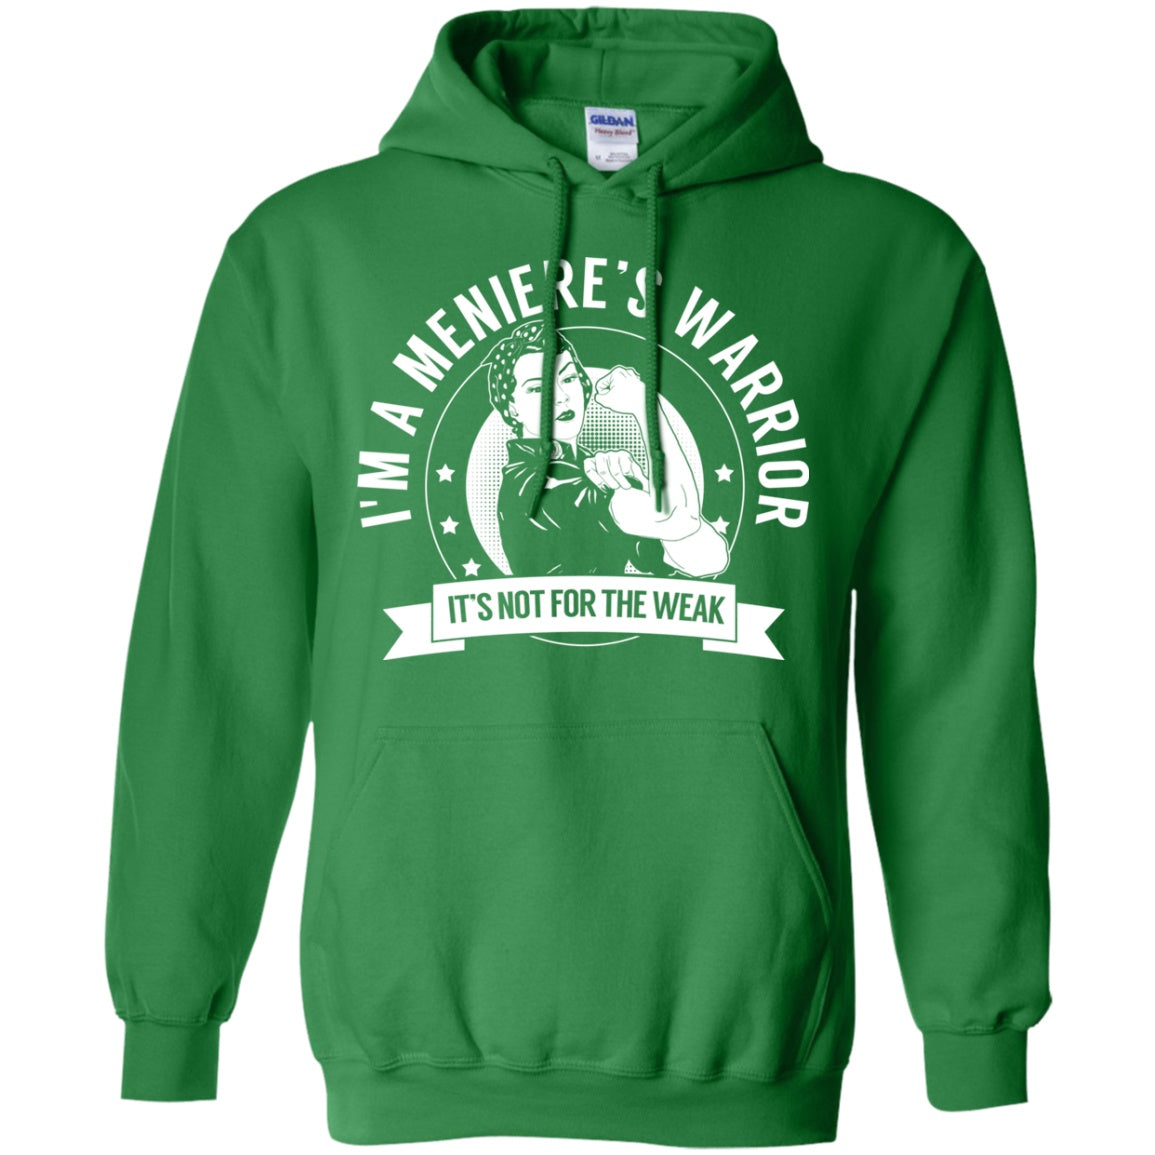 Meniere's Disease - Meniere’s Warrior NFTW Pullover Hoodie 8 oz. - The Unchargeables